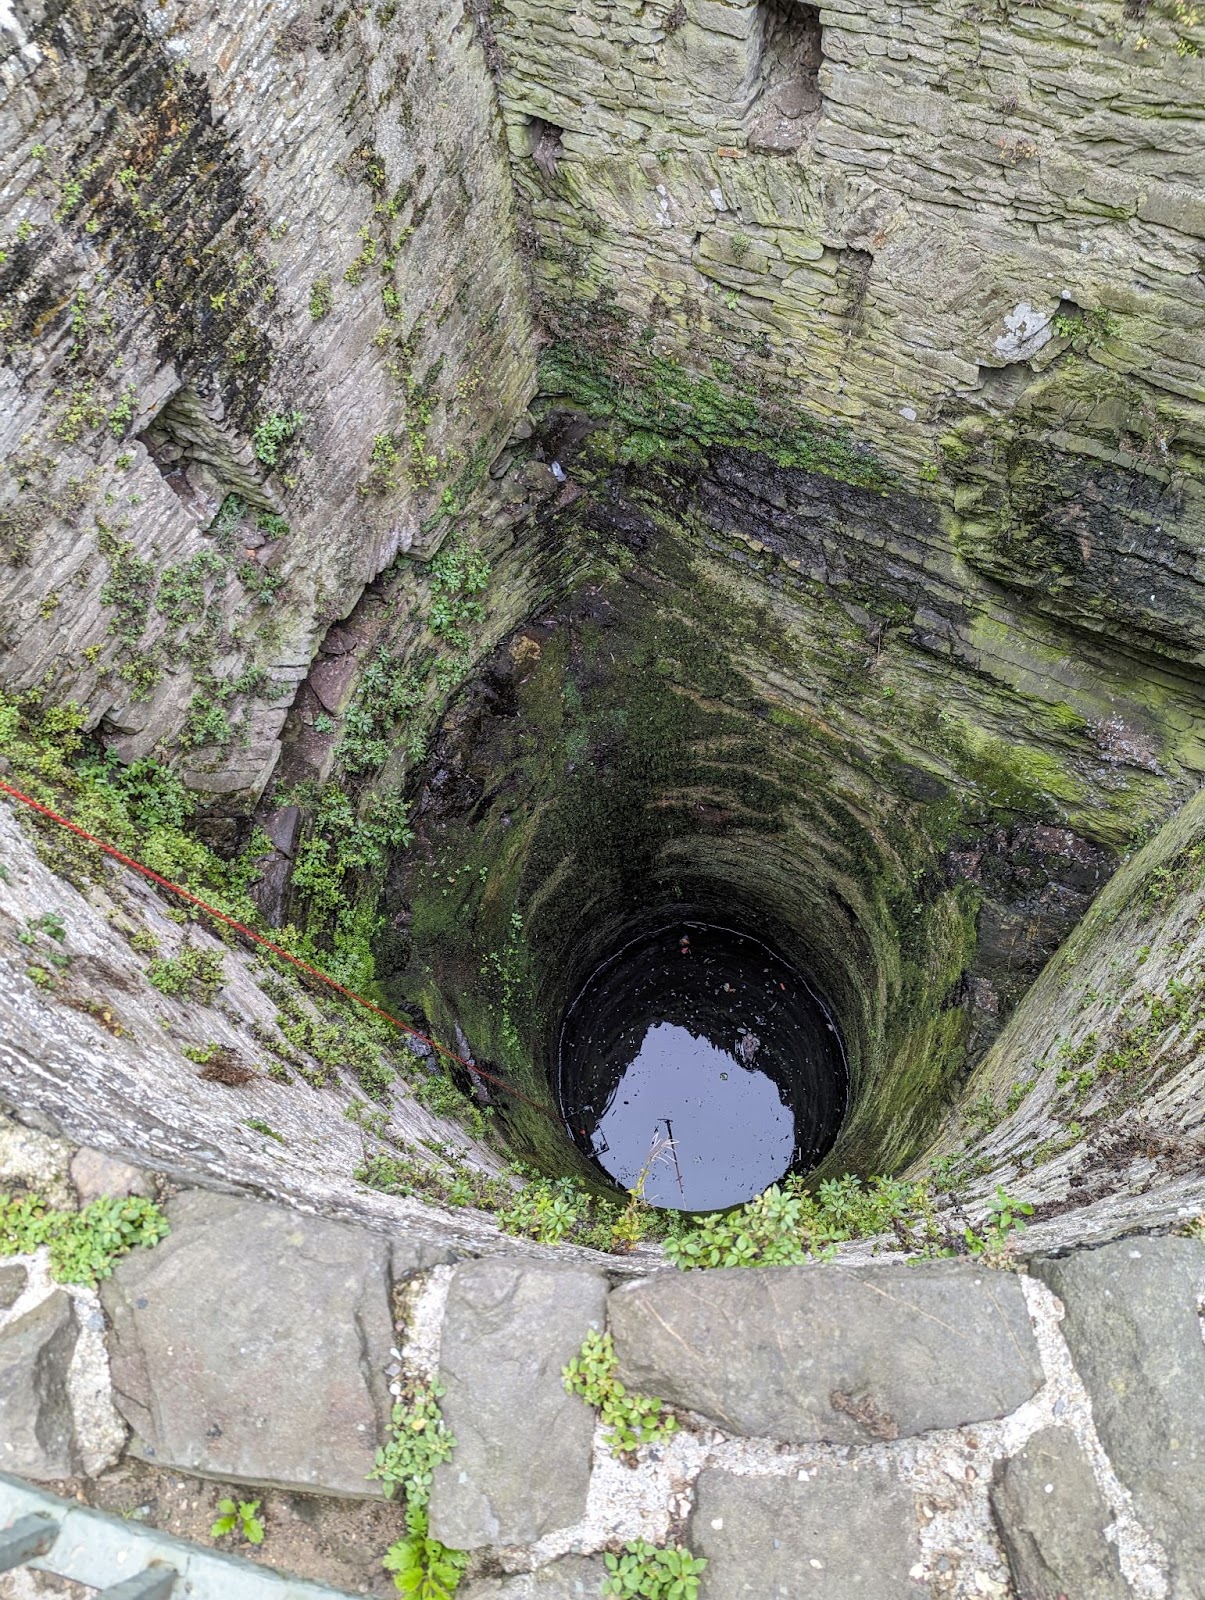 RSPCA rescue gull from well at historic Conwy Castle